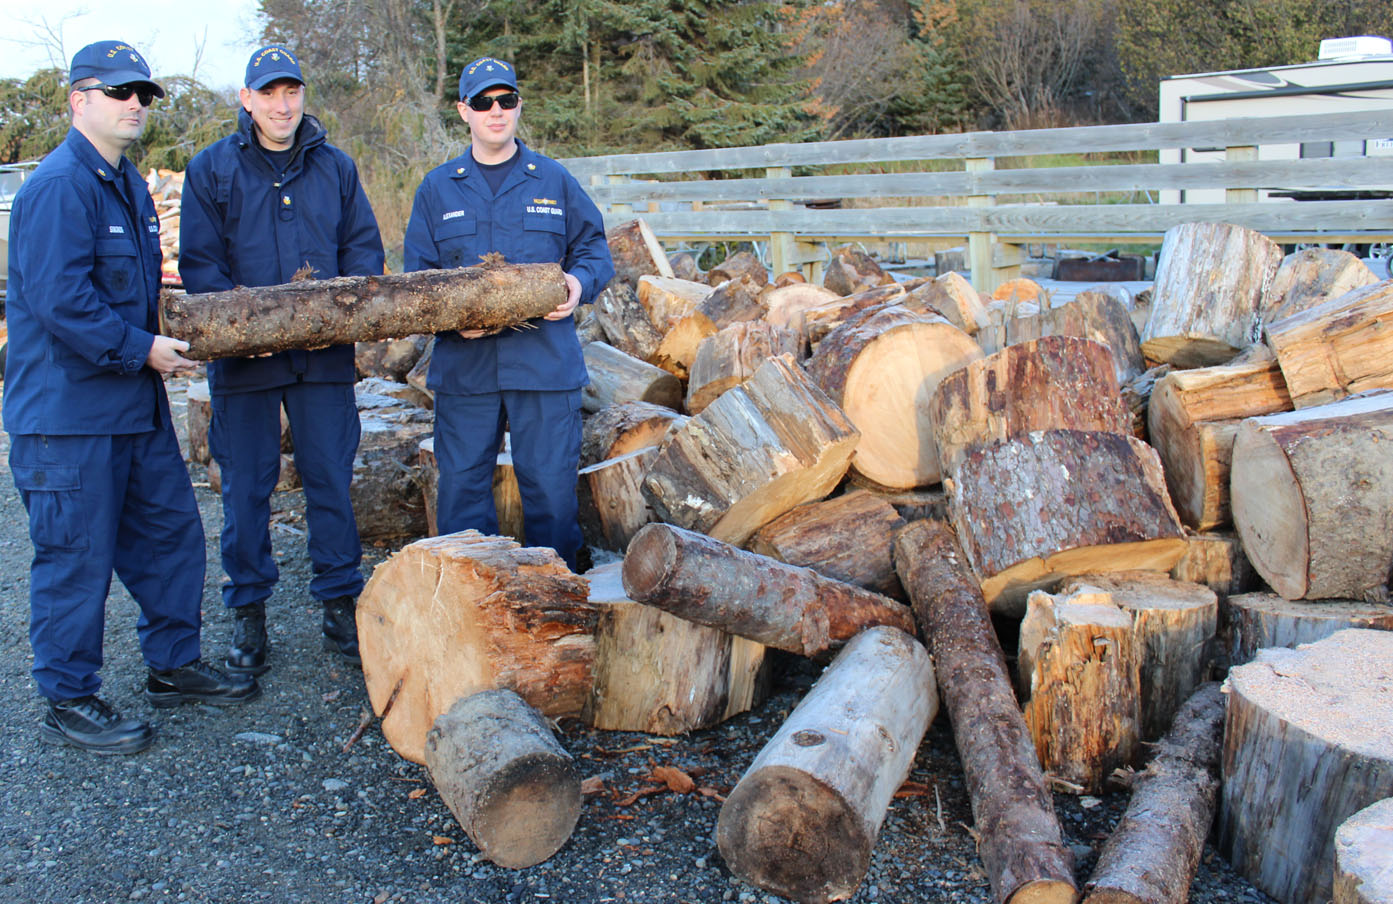 A little teamwork from David Simonds, left, Aleksander Kay and Jonathan Alexander of the U.S. Coast Guard Marine Safety Detachment in Homer are getting the job done: wood chopped for firewood and being sold by the truckload to benefit Share the Spirit. Other MSD personnel helping with the project are Lt. William Albright, Justin Harrison and Keith McKinney. -Photo by McKibben Jackinsky, Homer News